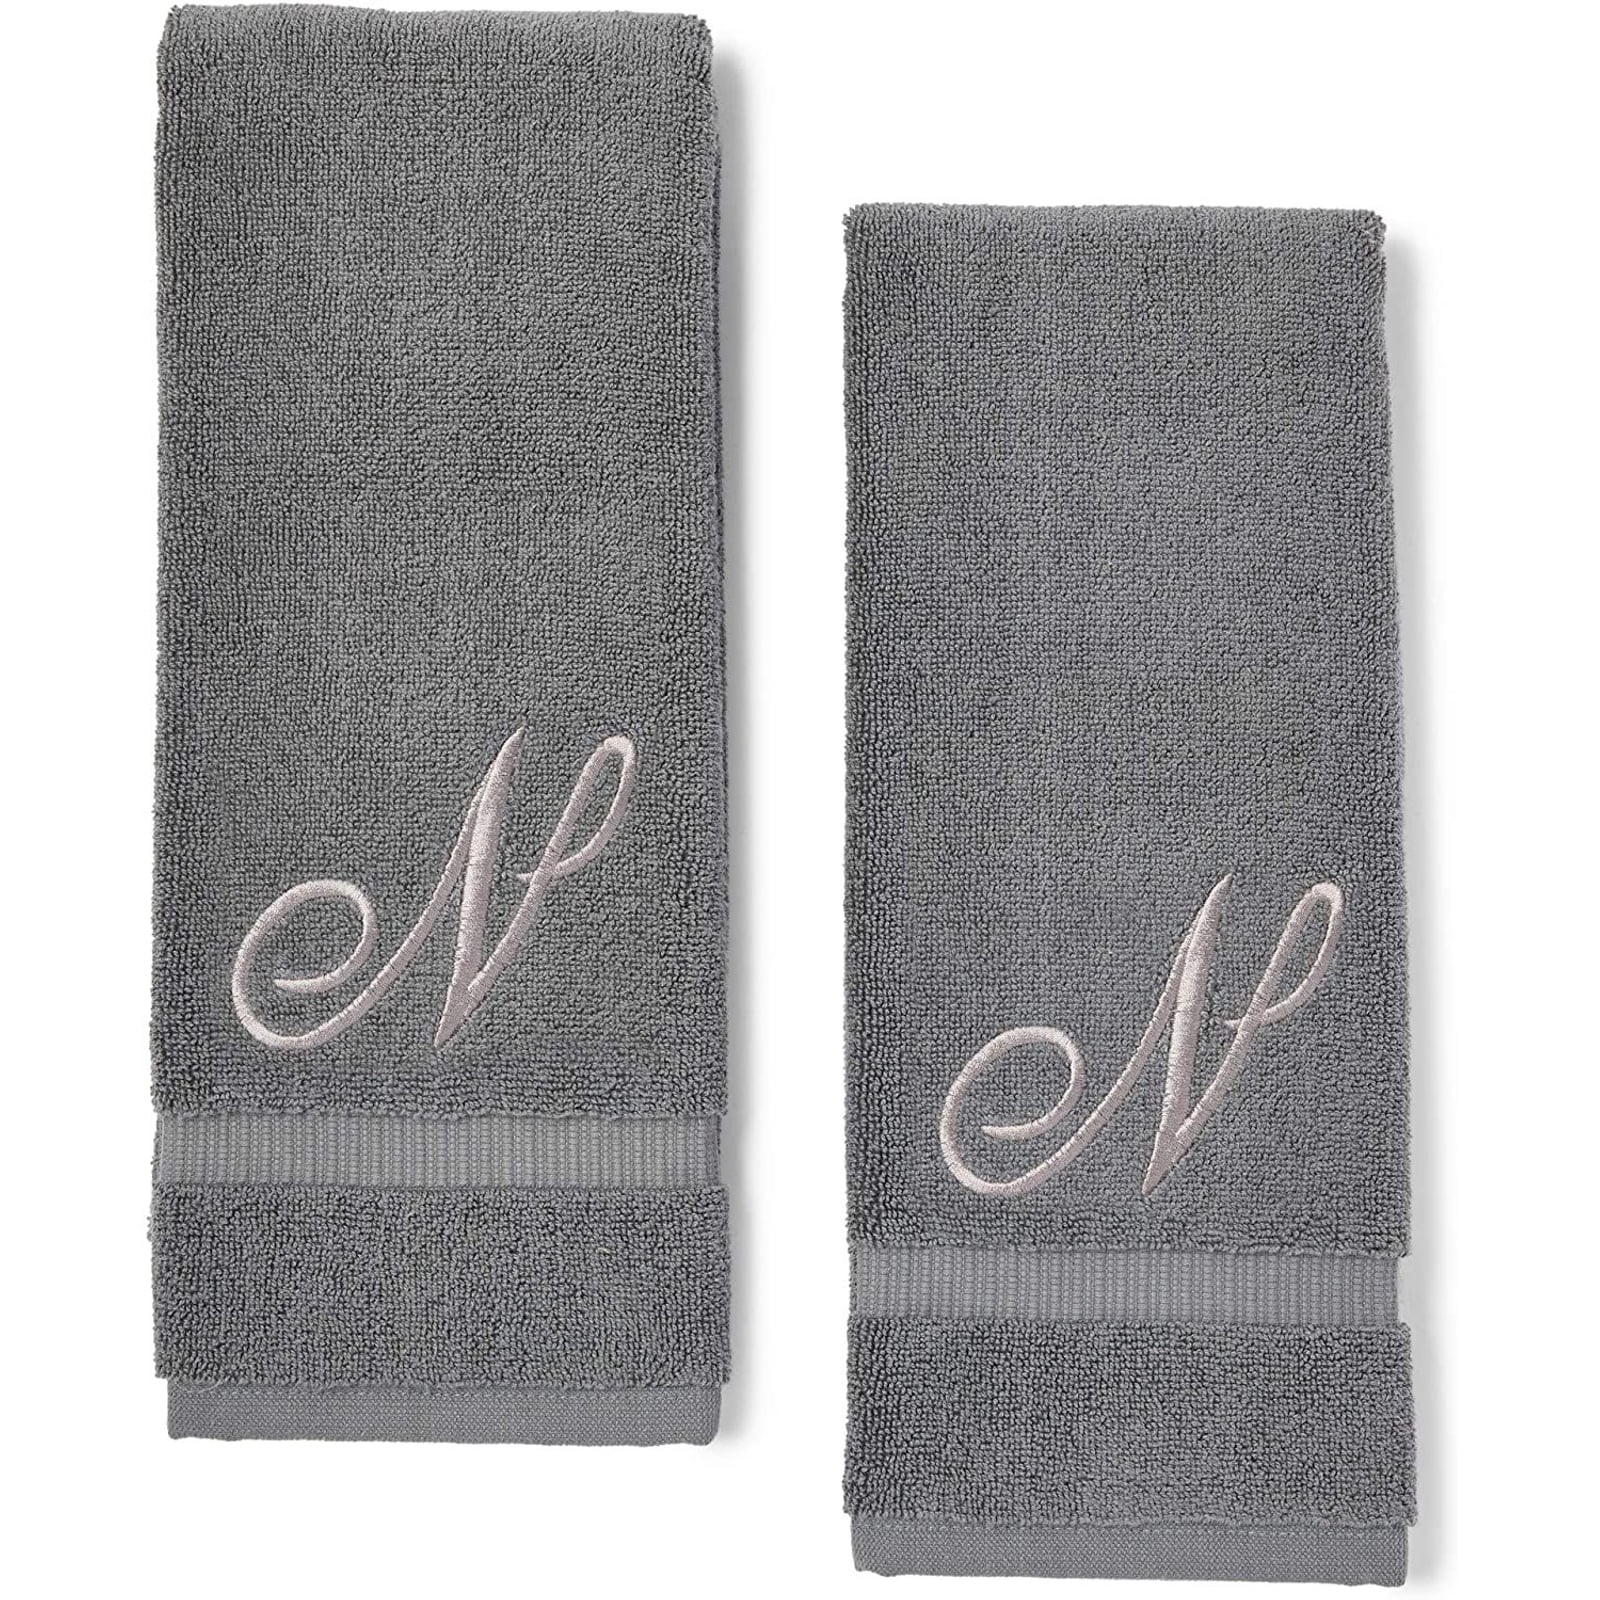 LOTUS KANJI PEACE SET OF 2 BATH HAND TOWELS EMBROIDERED BY LAURA 